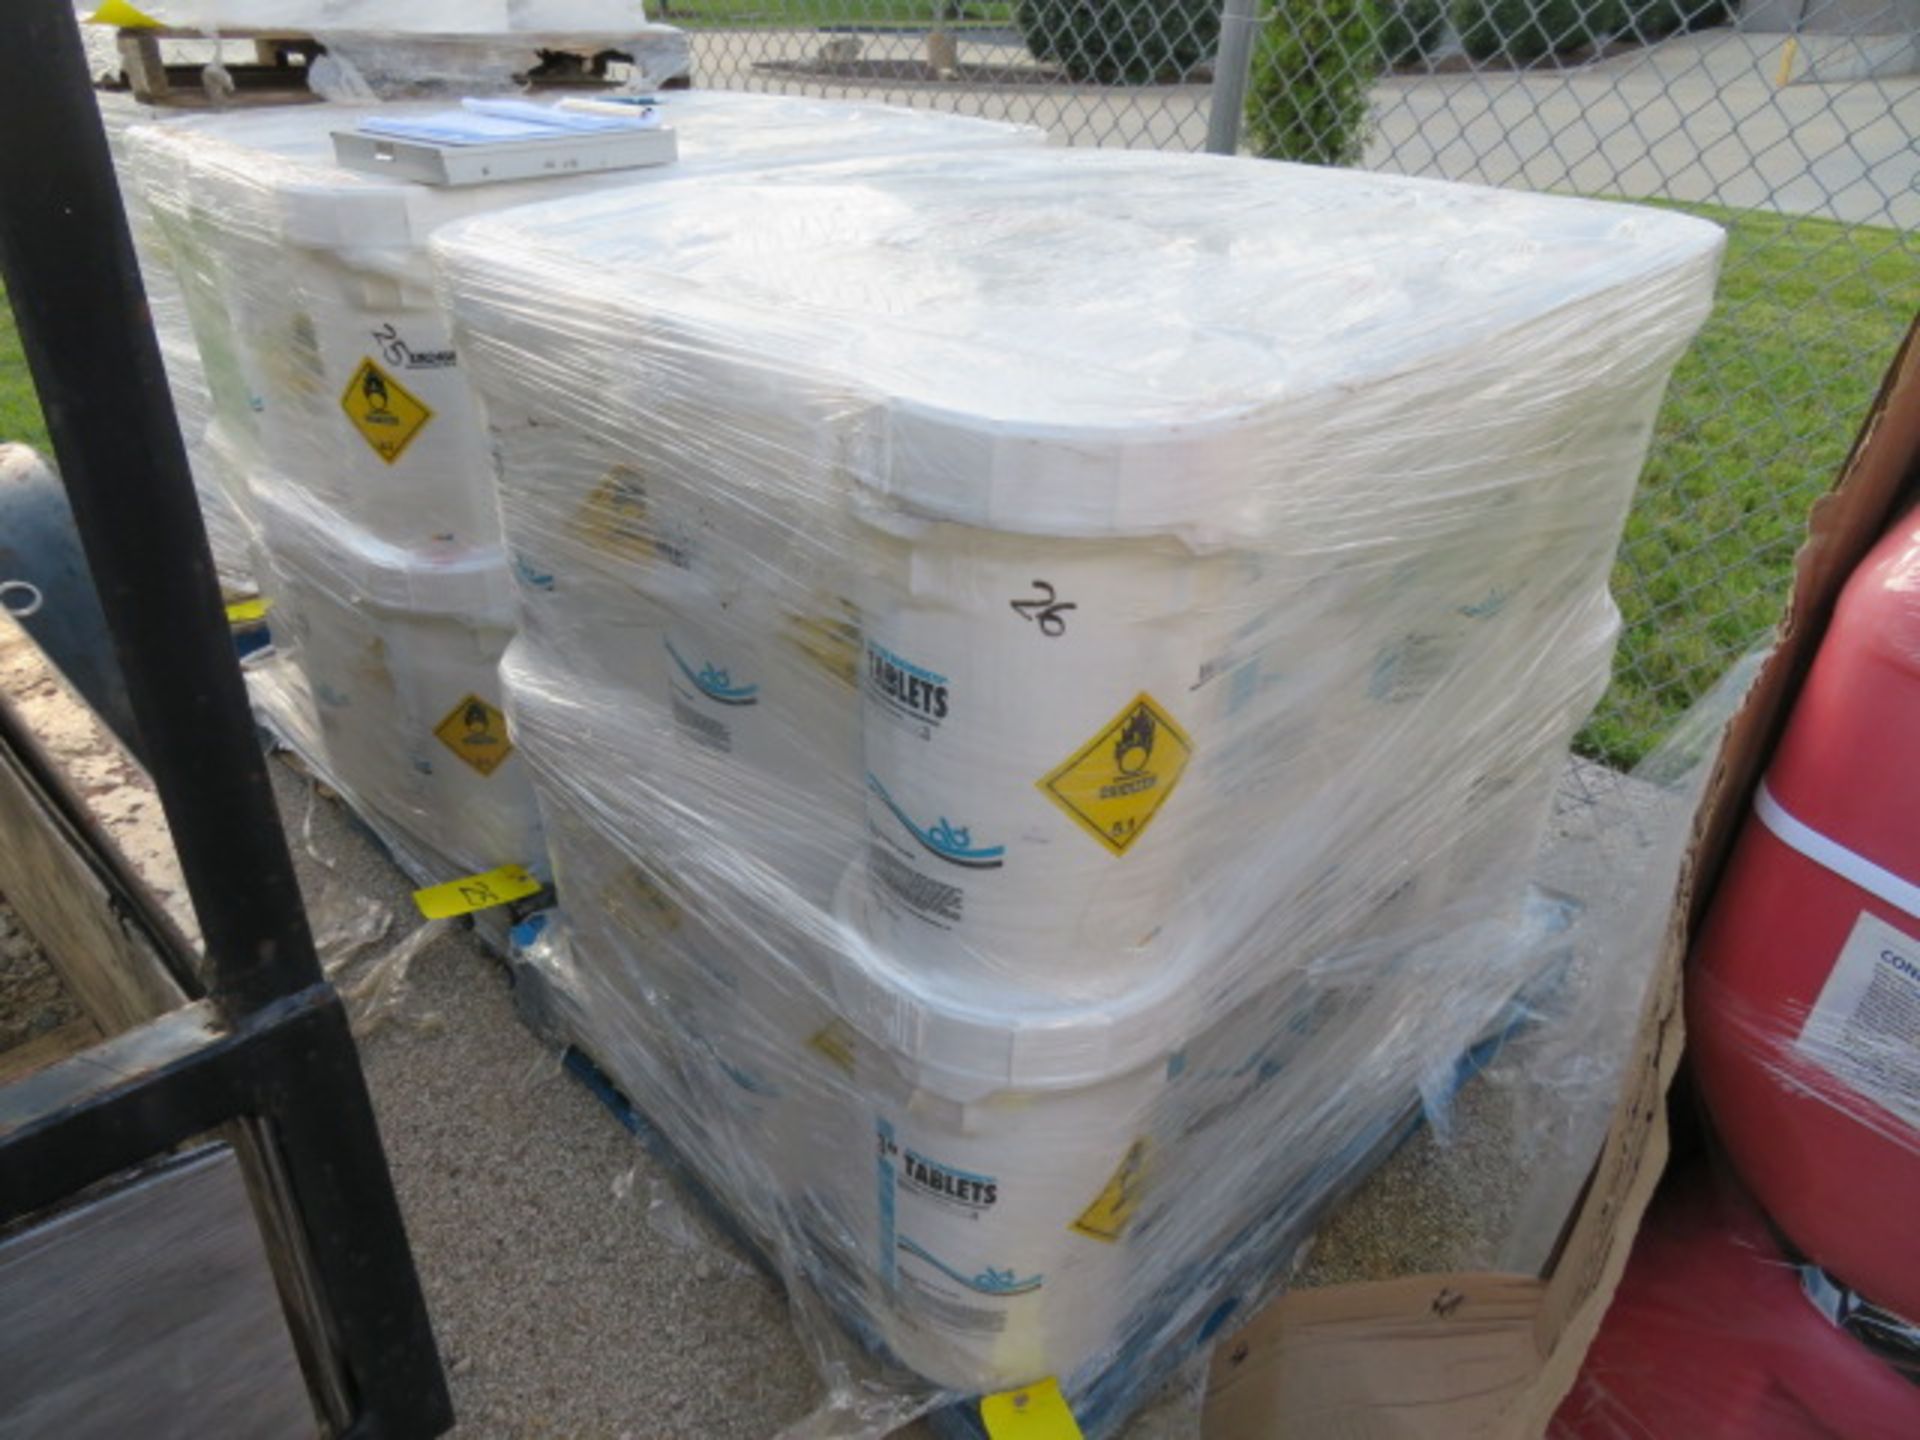 LOT OF STABILIZING CHLORINATING CONCENTRATE, 3" TABLETS (one pallet, (24) 50 lb. sealed buckets) - Image 2 of 2